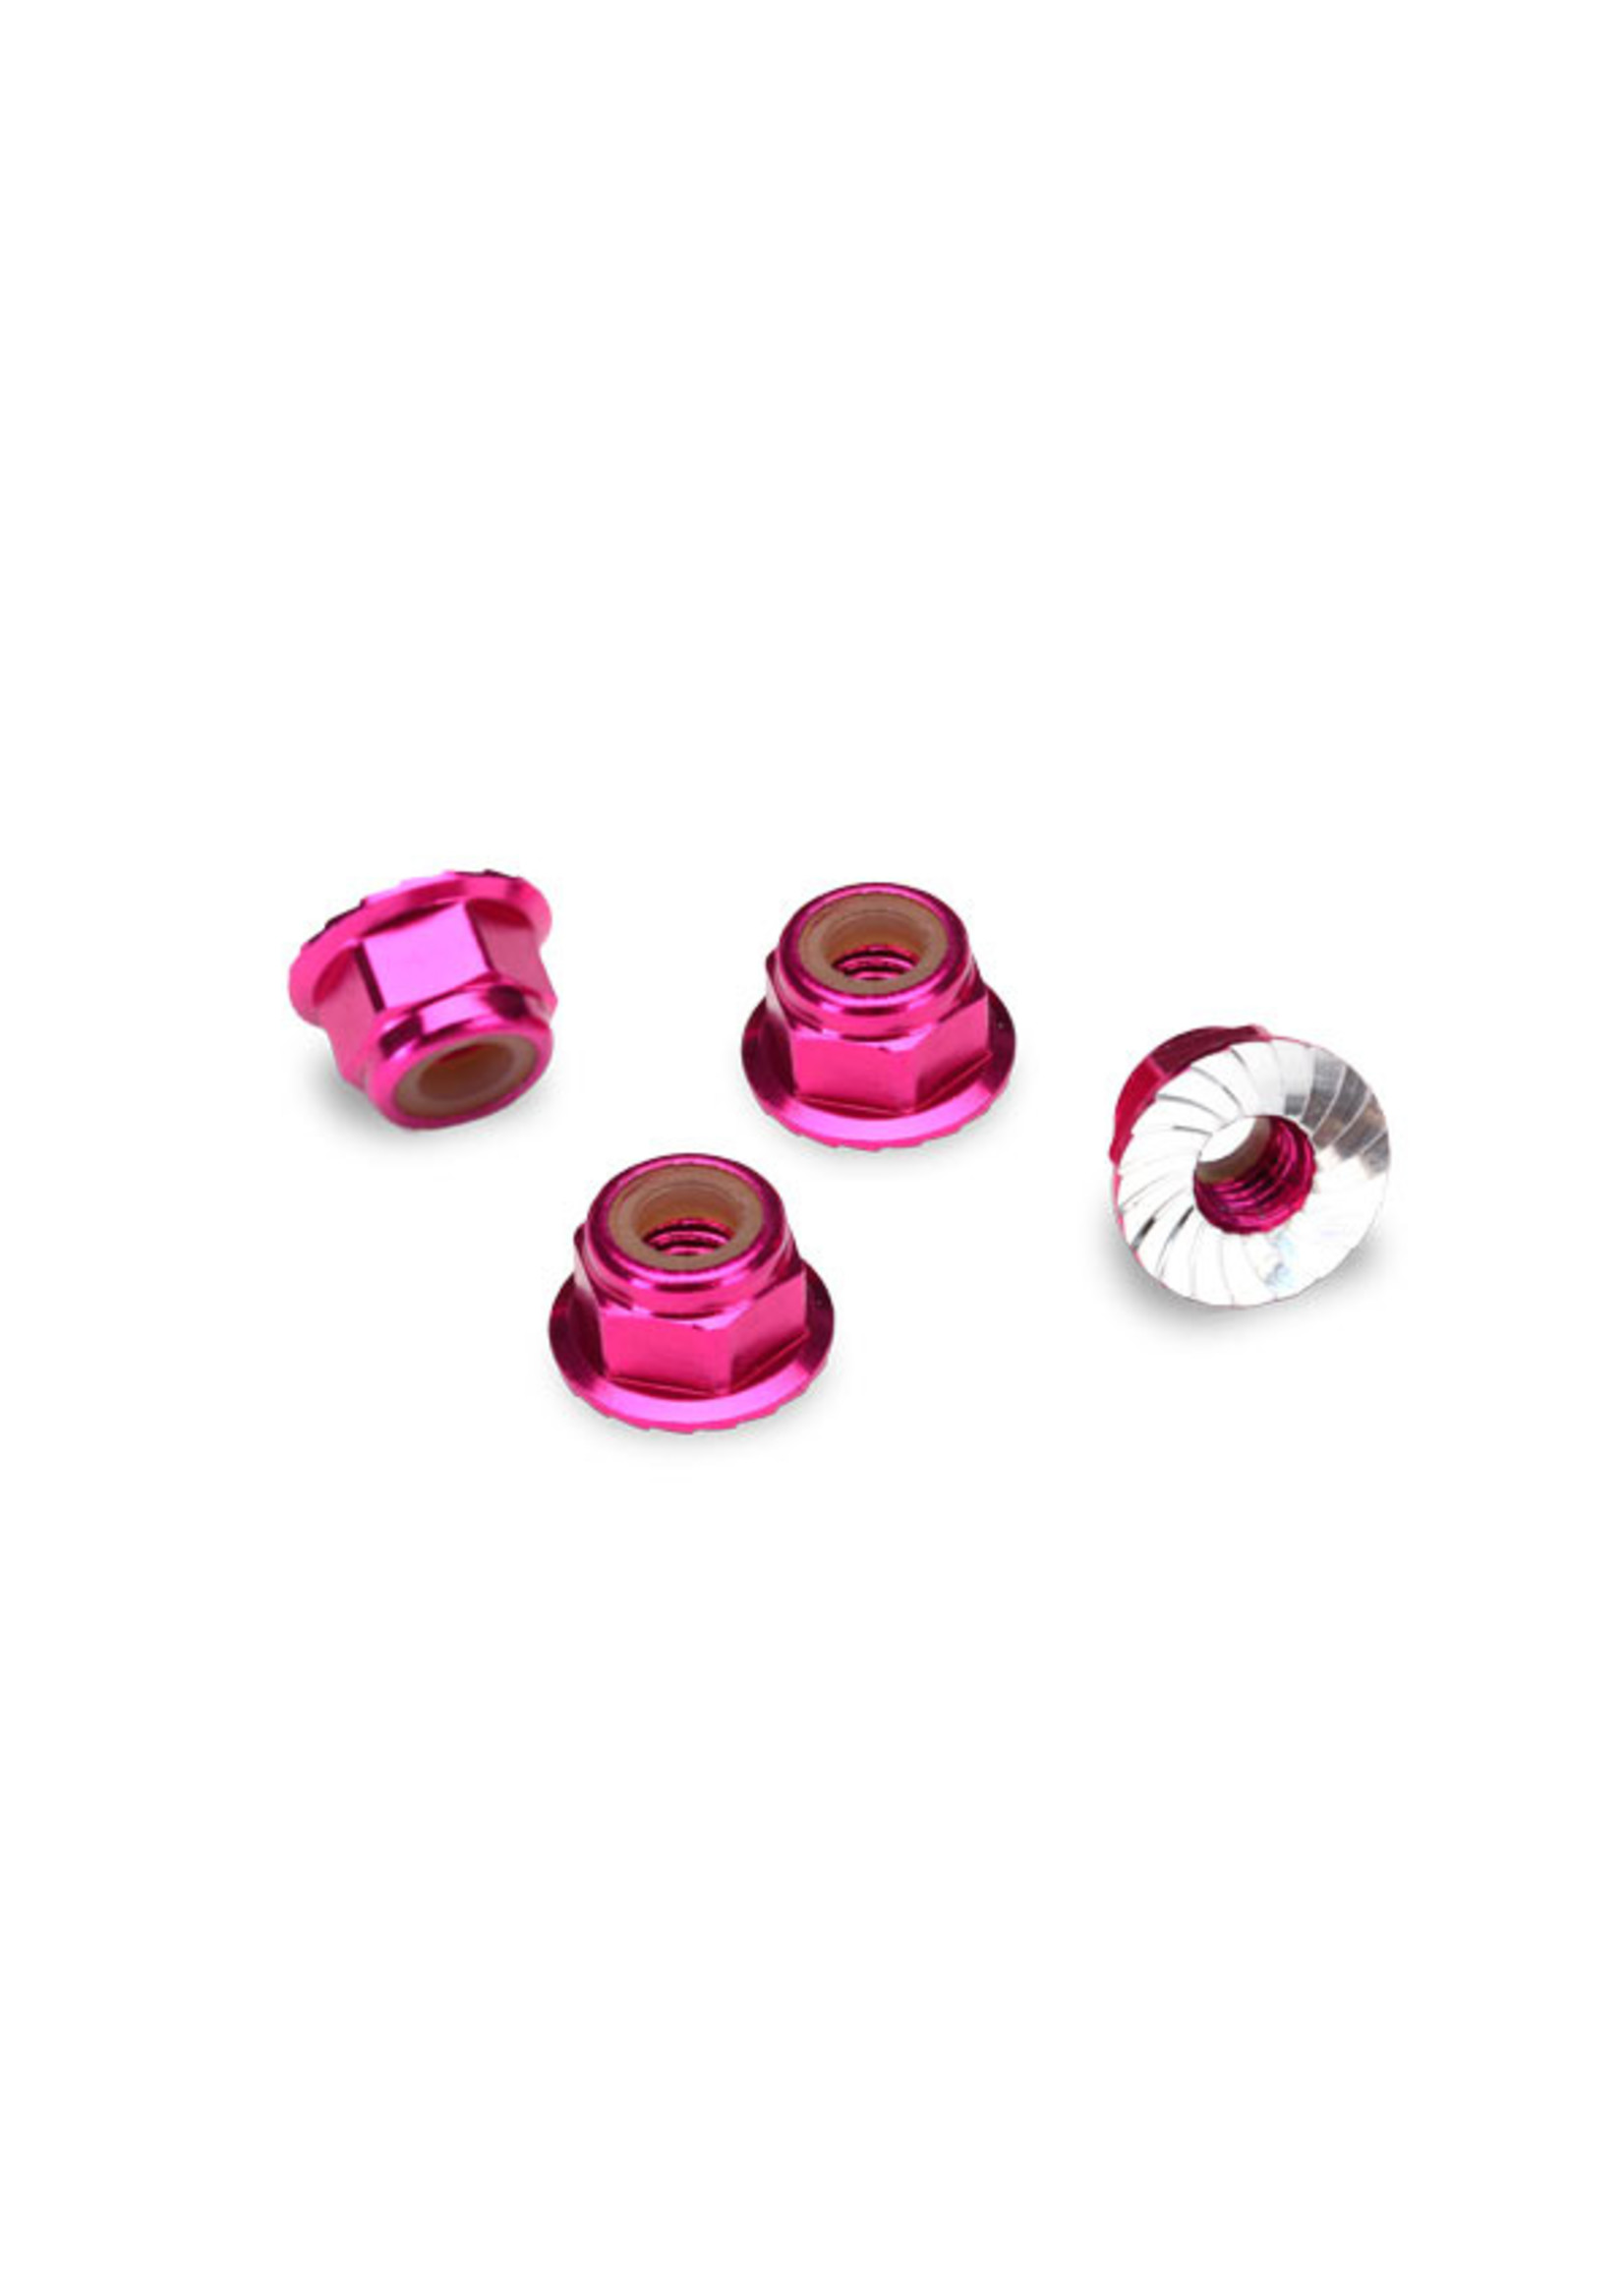 Traxxas 1747P - 4mm Aluminum Flanged Locking Nuts - Pink